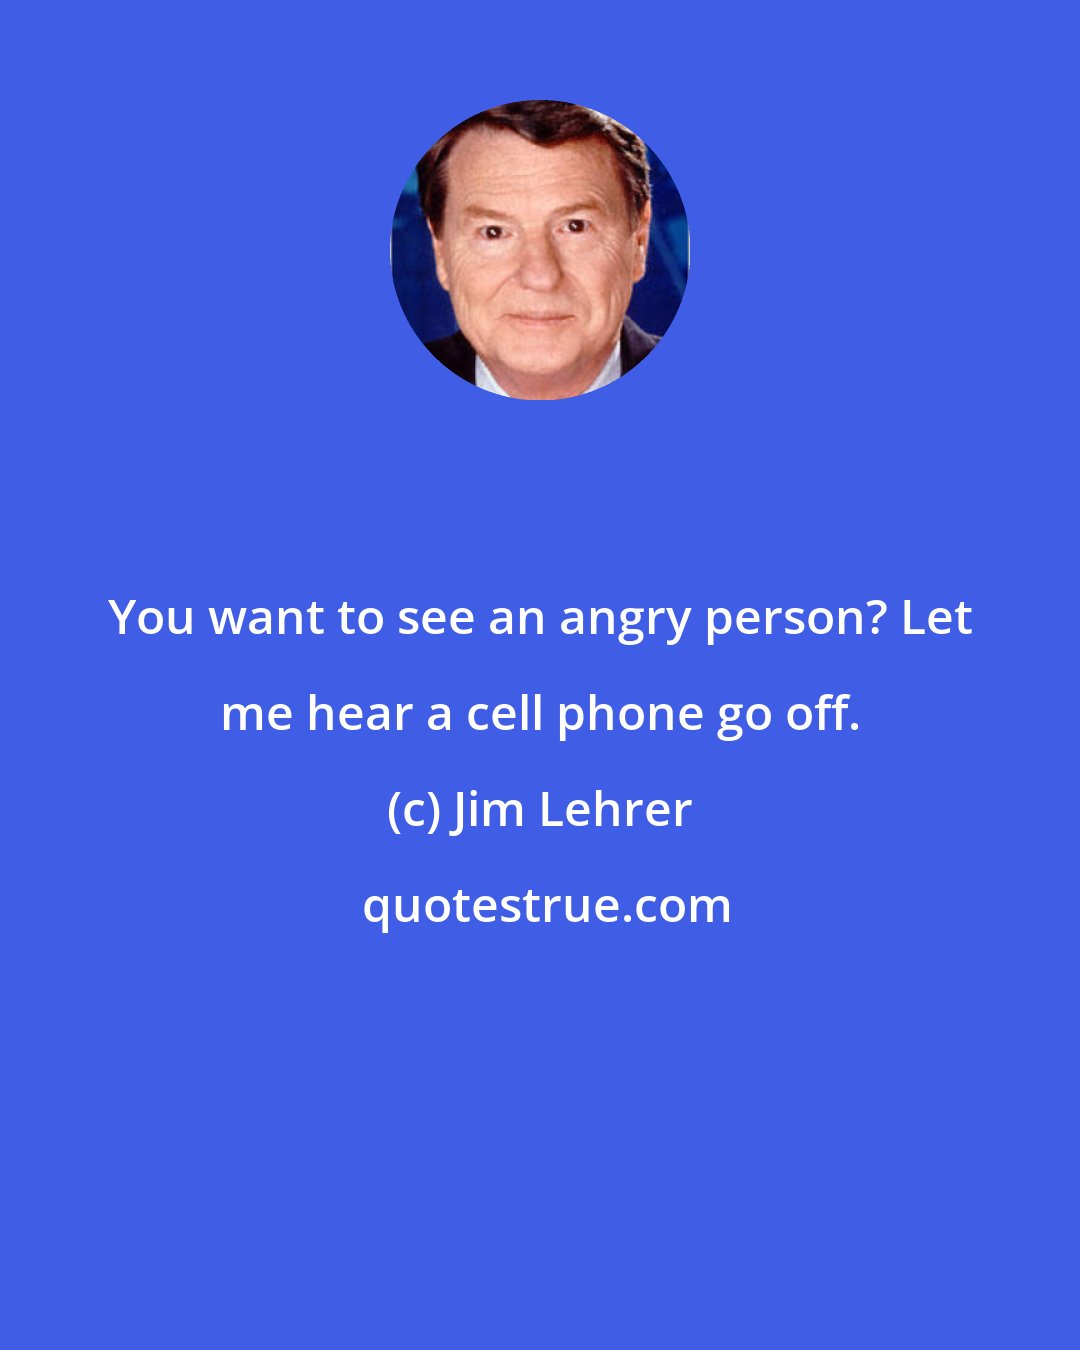 Jim Lehrer: You want to see an angry person? Let me hear a cell phone go off.